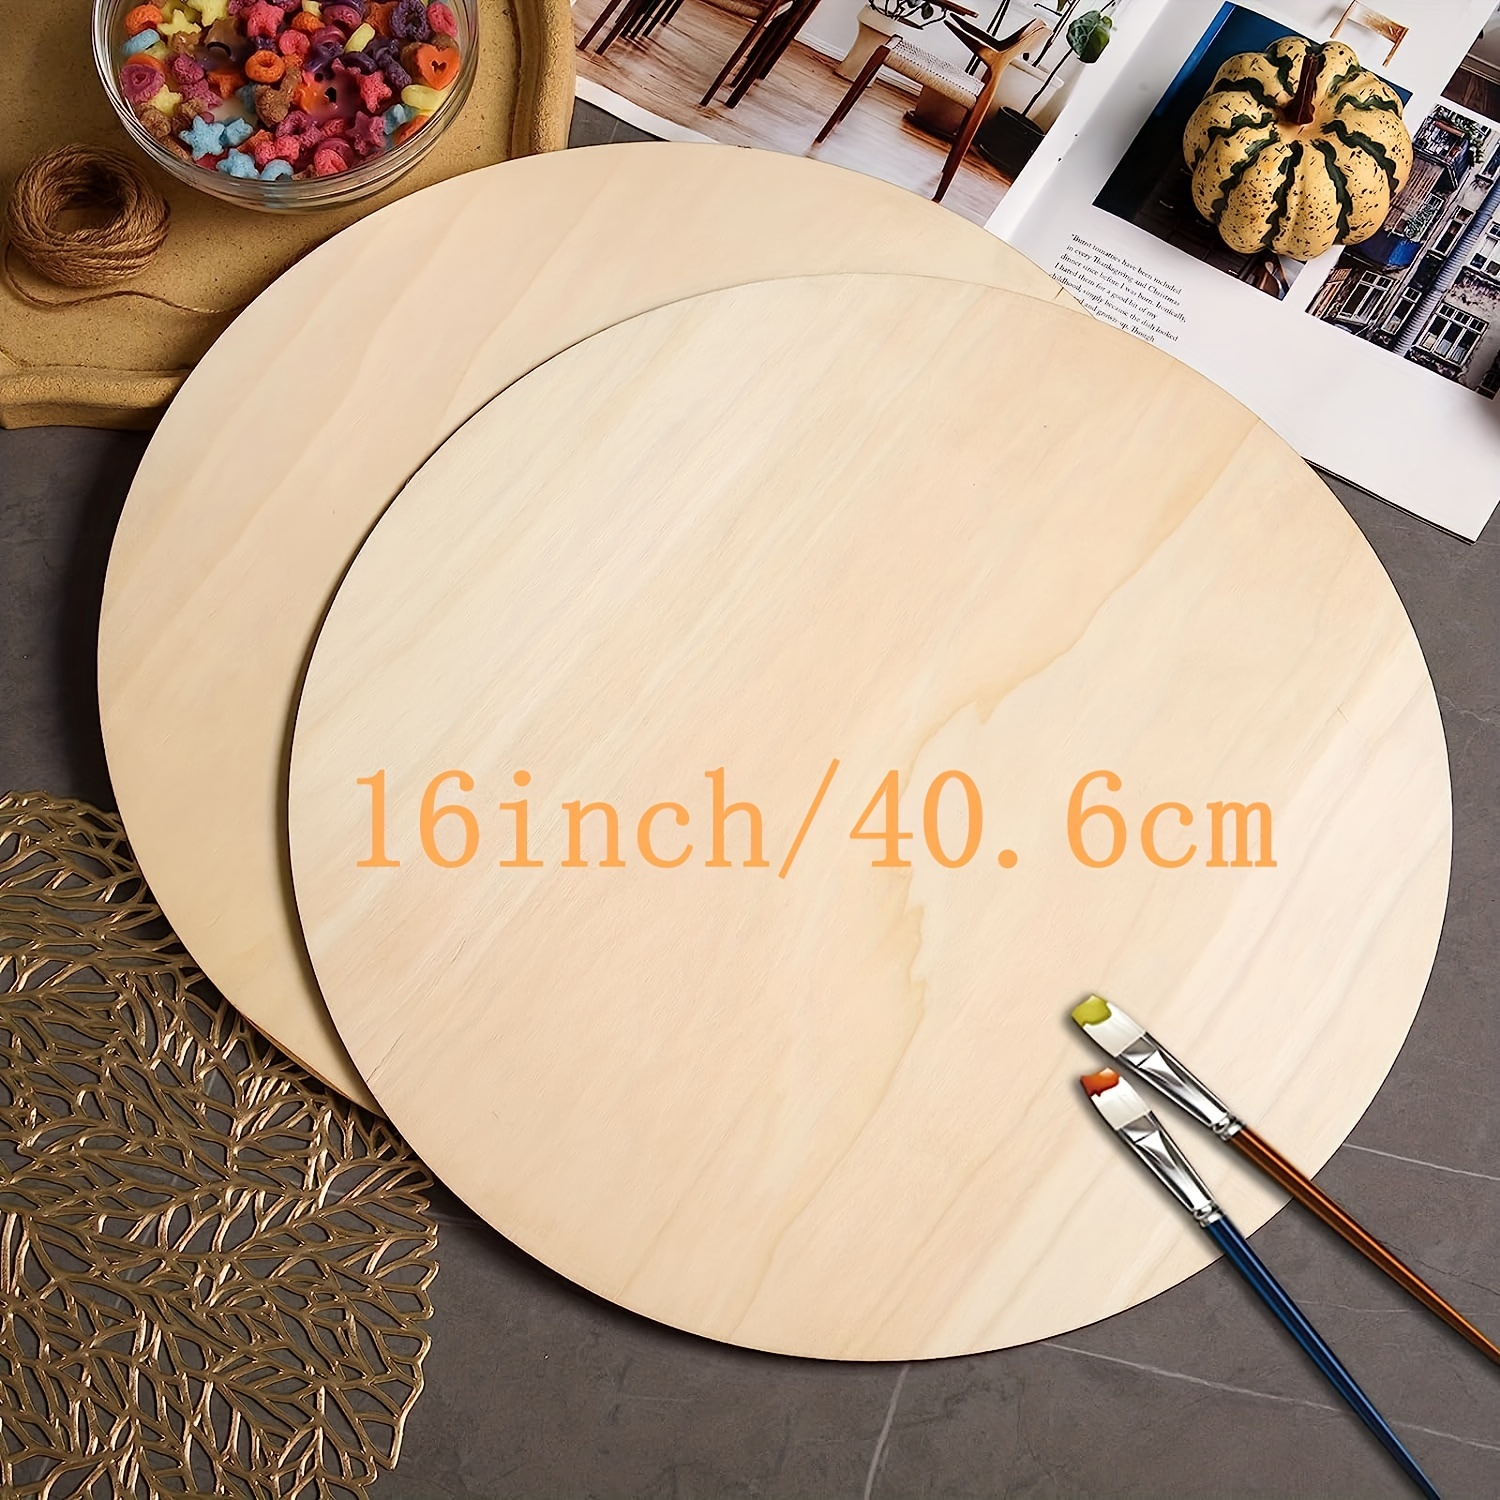 3 Pieces 12 Inch Wood Circles for Crafts - Unfinished Blank Wooden Circle,  Wood Slices for Pain - Cutting Boards, Facebook Marketplace